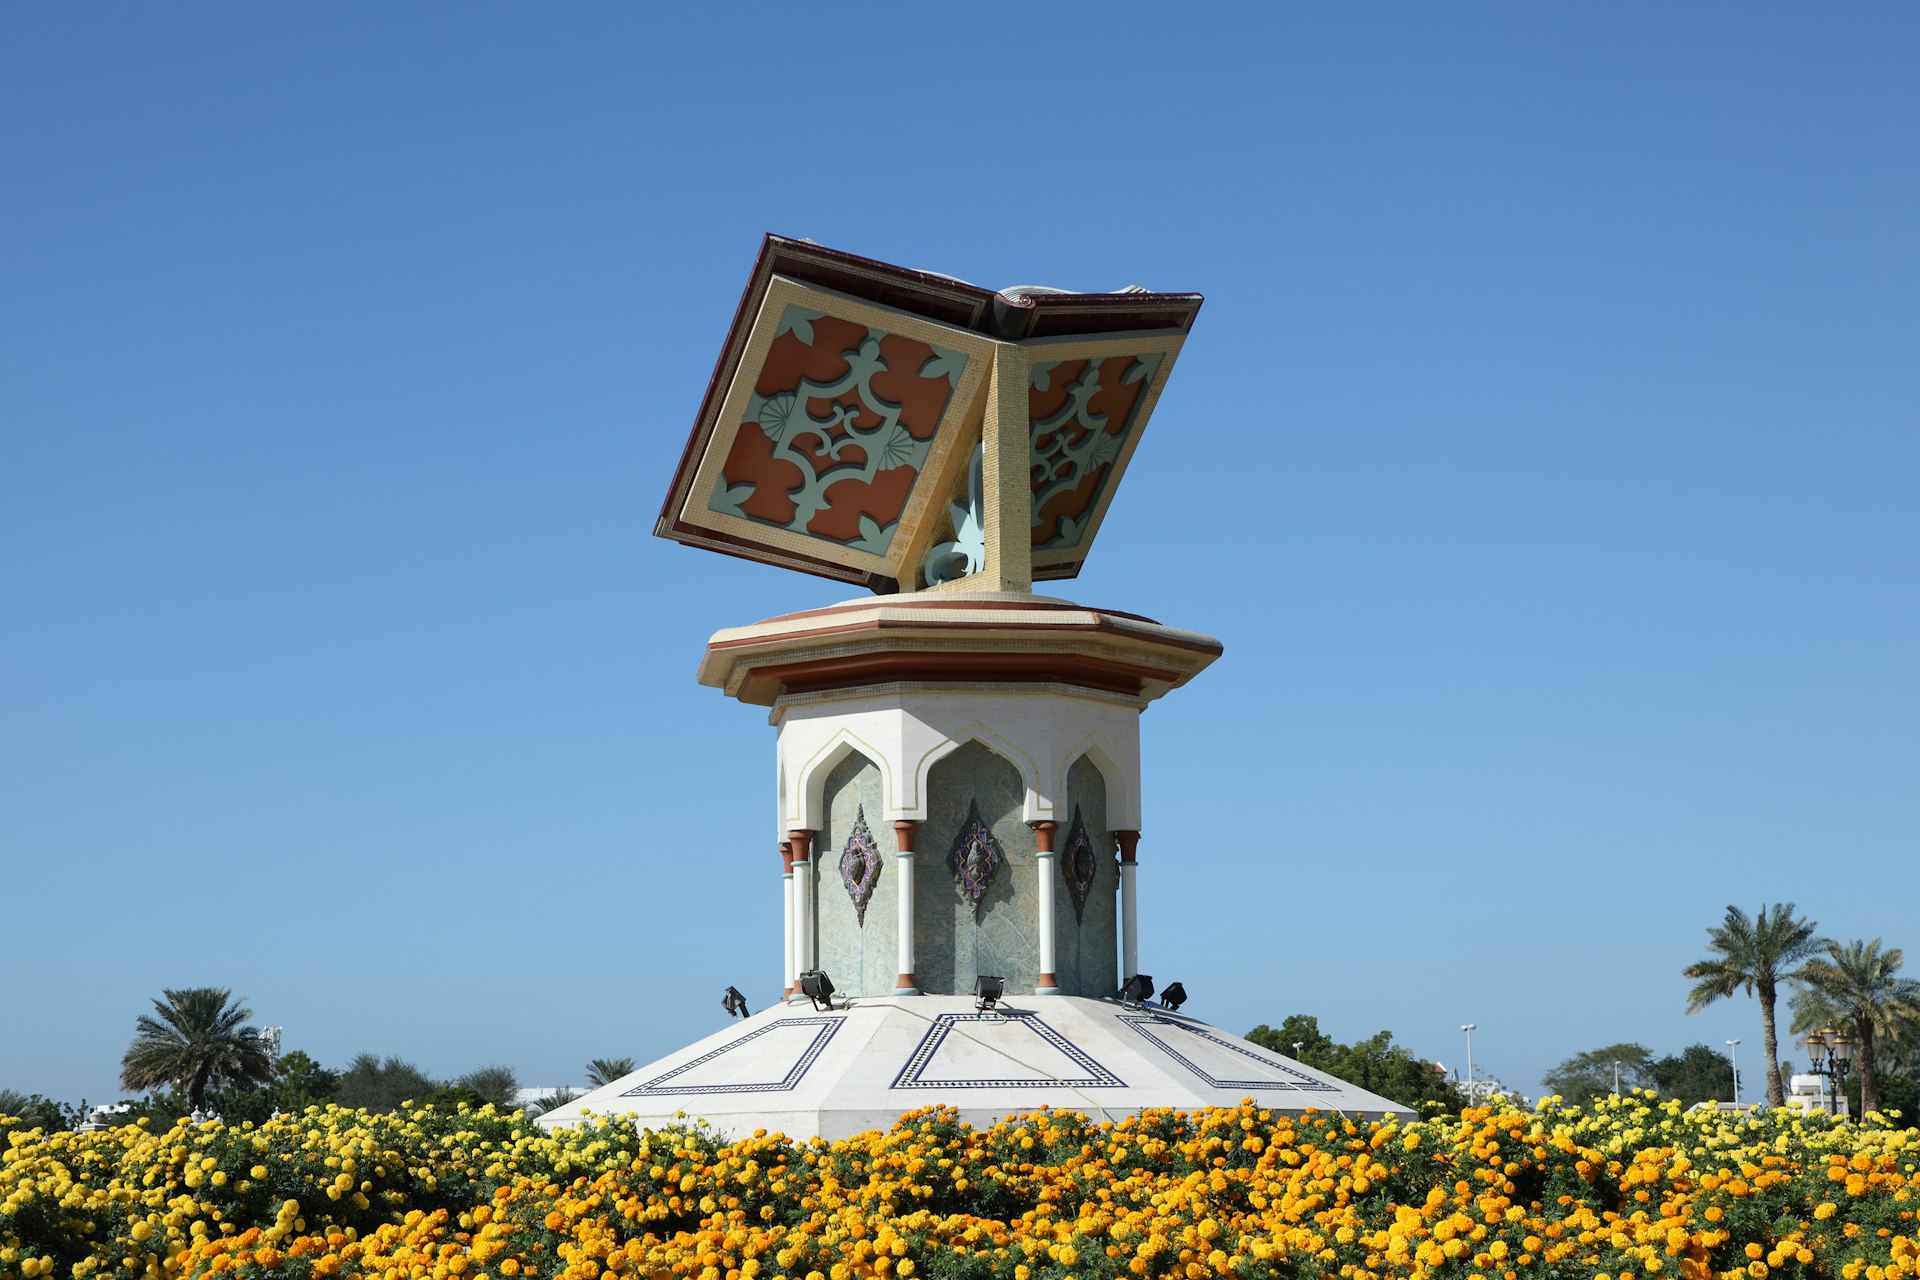 Features - Book monument in Sharjah, UAE